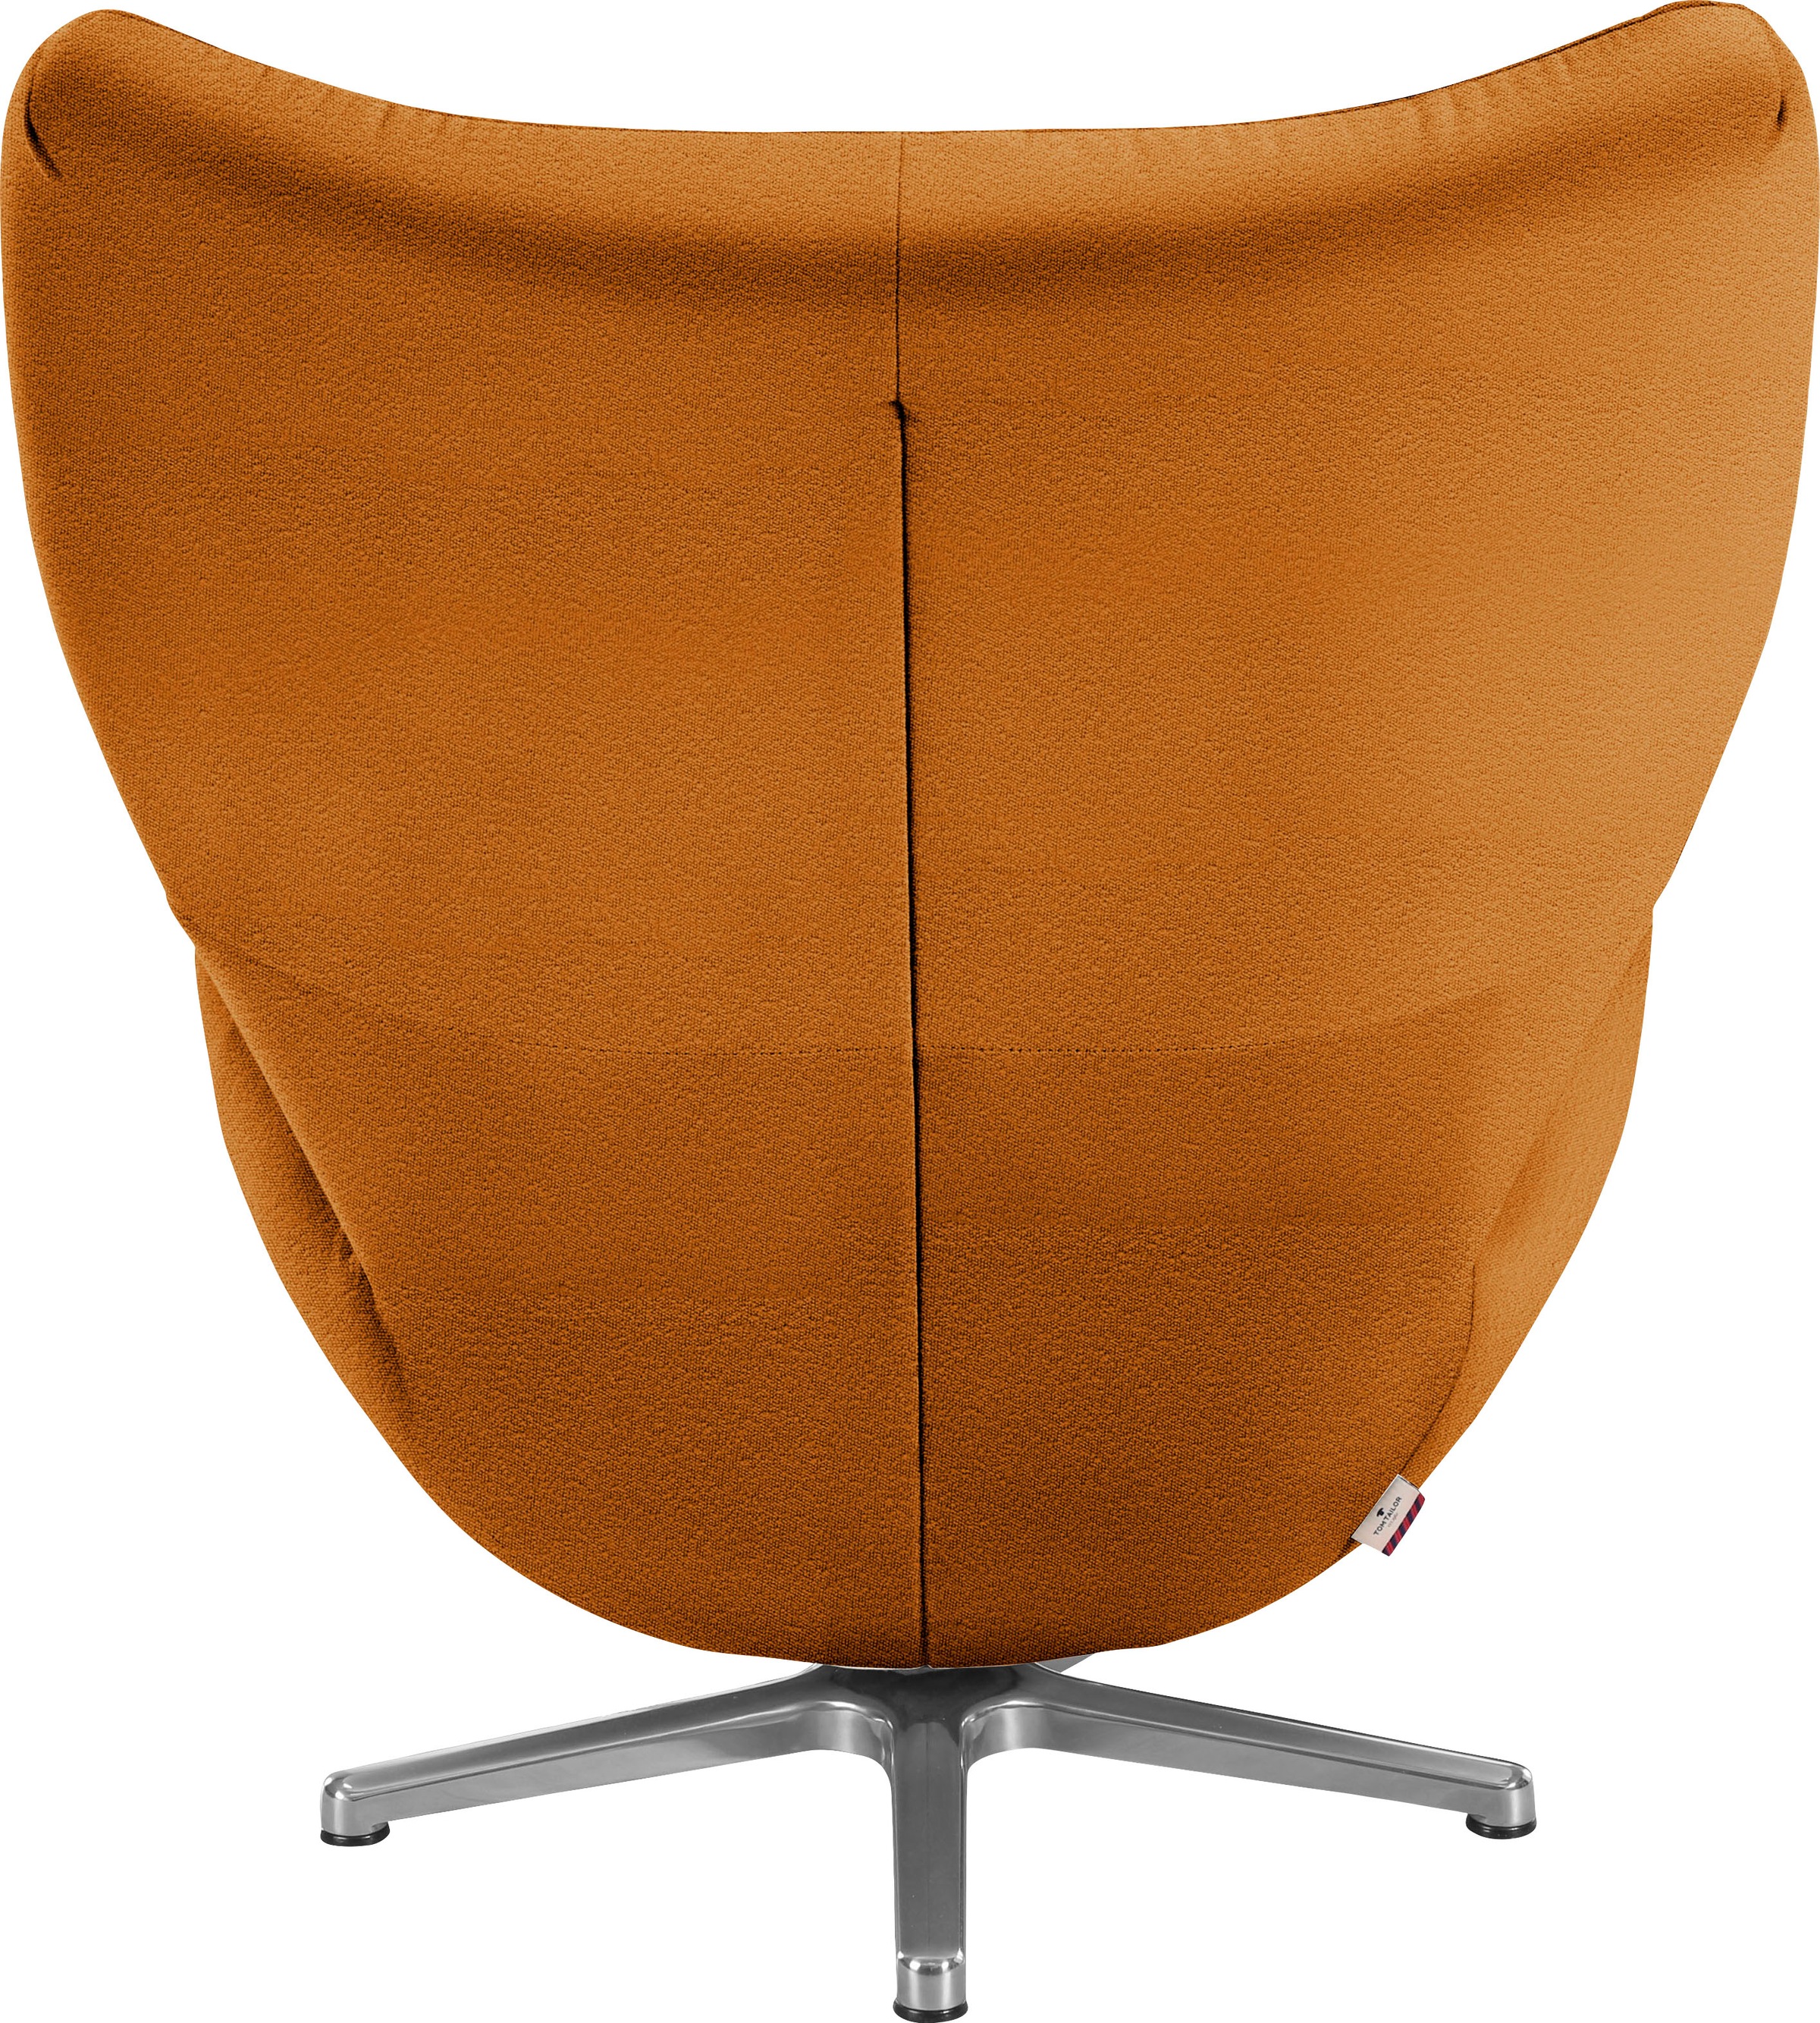 HOME TOM »TOM Chrom Loungesessel in BAUR Metall-Drehfuß TAILOR | PURE«, mit